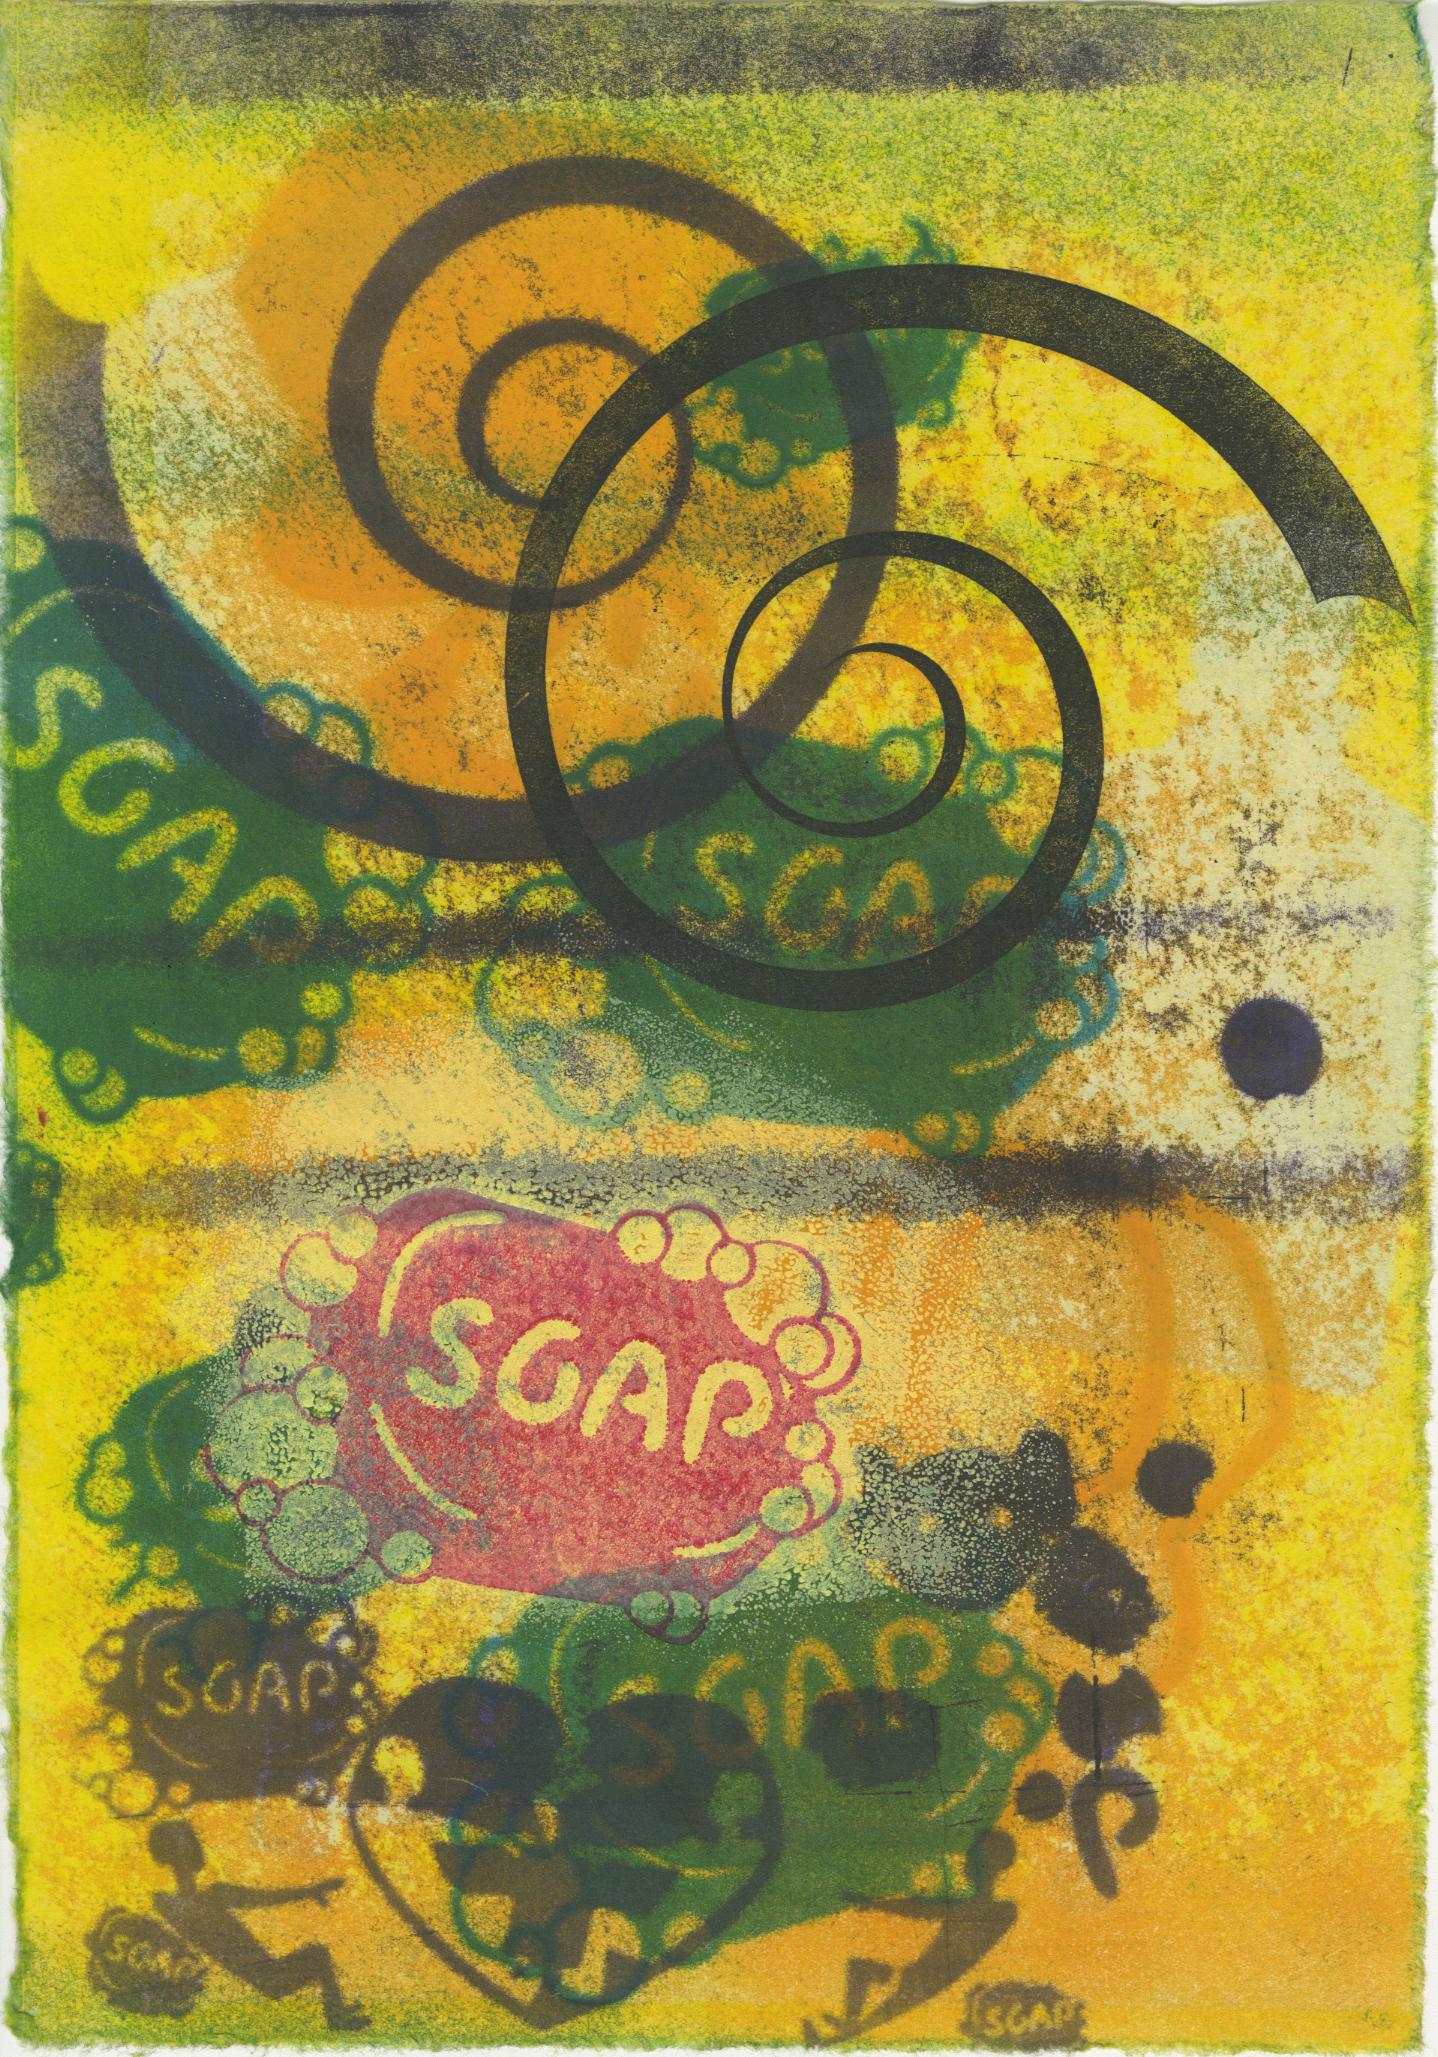 A relief monoprint of multiple digial prints into one with vibrant colors consisting of green and yellow throughout the piece. The prints include spirals on top of the page